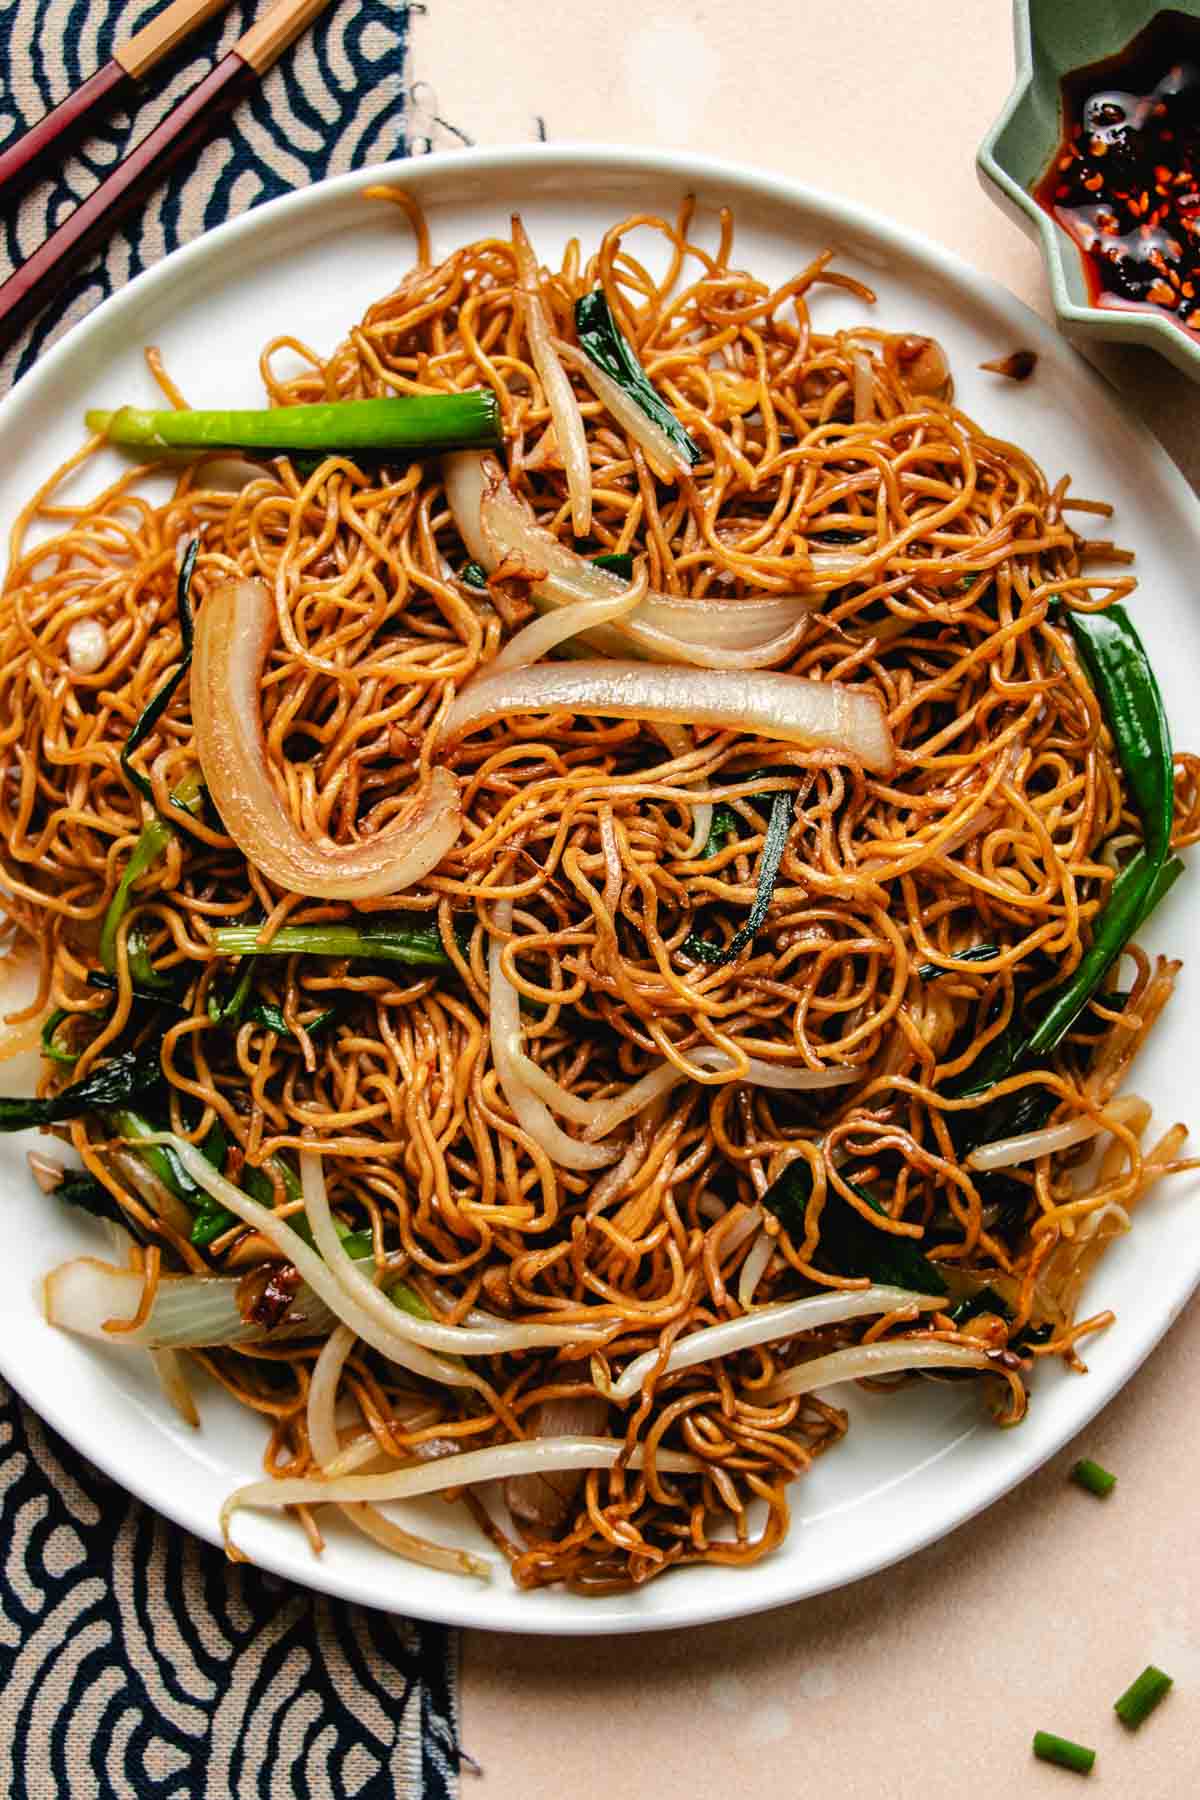 Feature image shows crispy Cantonese chow mein noodles with bean sprouts, onion, and garlic give served in a big white plate.